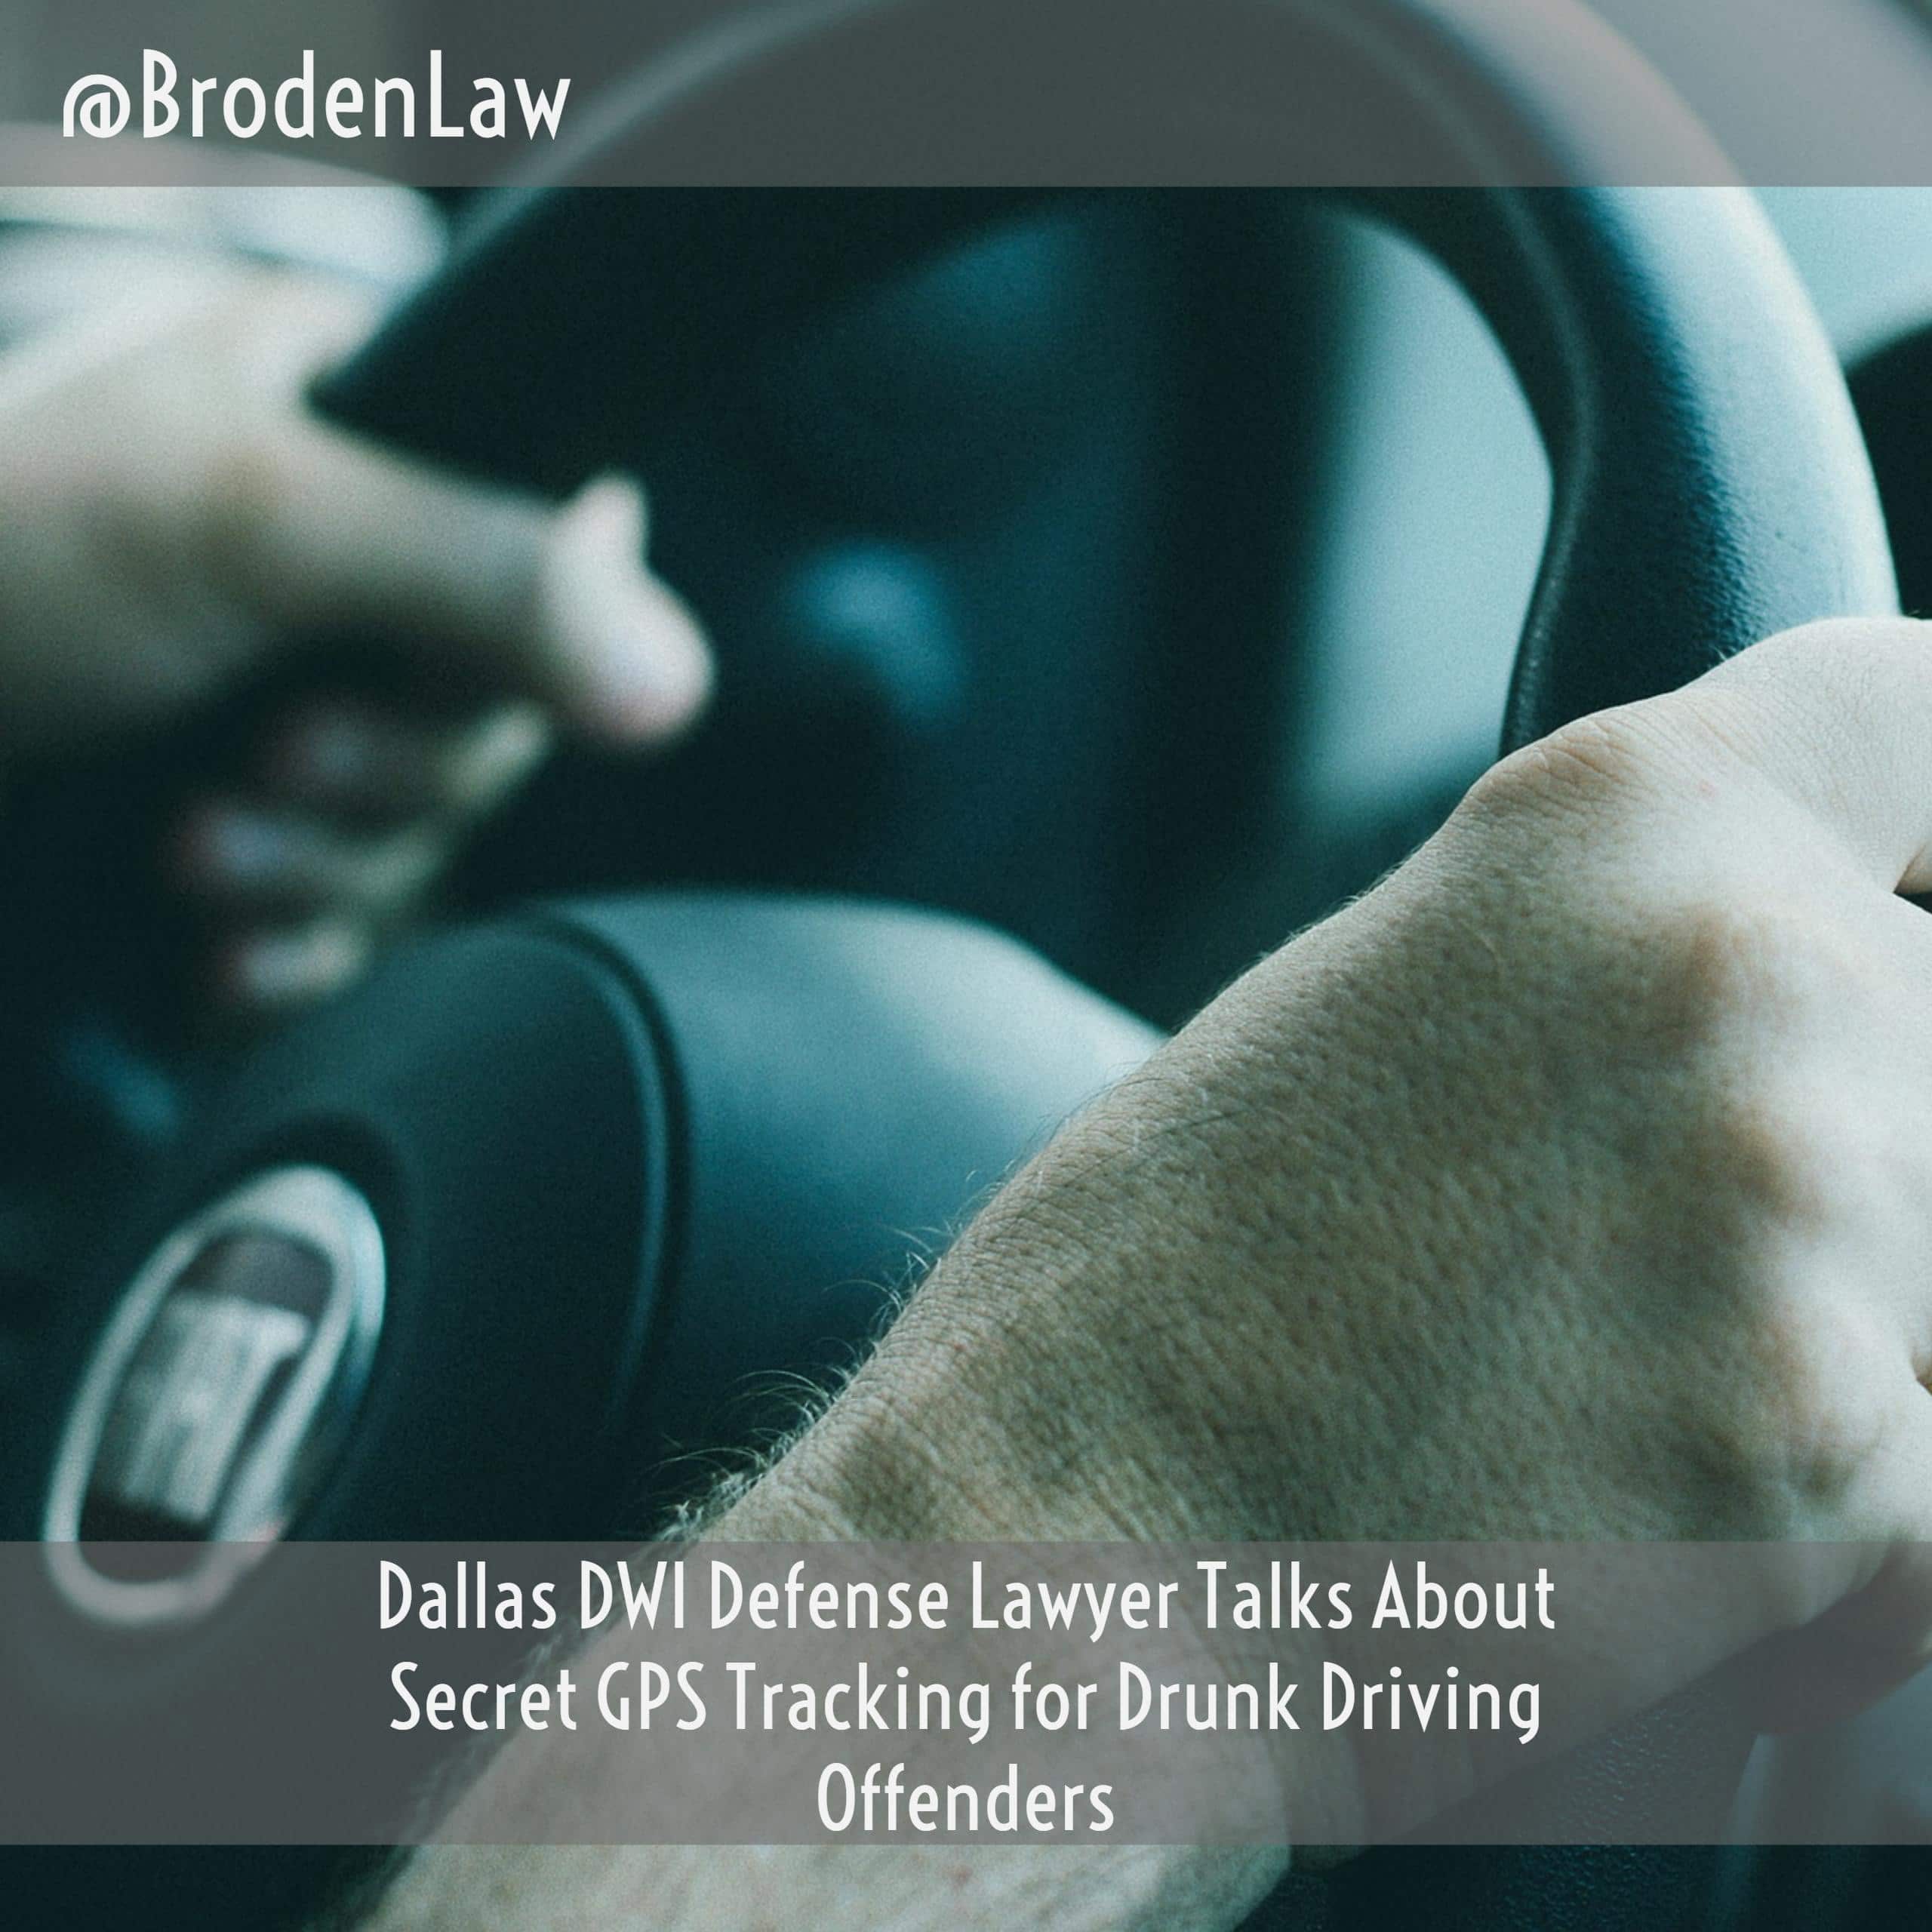 Dallas DWI Defense Lawyer Talks About Secret GPS Tracking for Drunk Driving Offenders